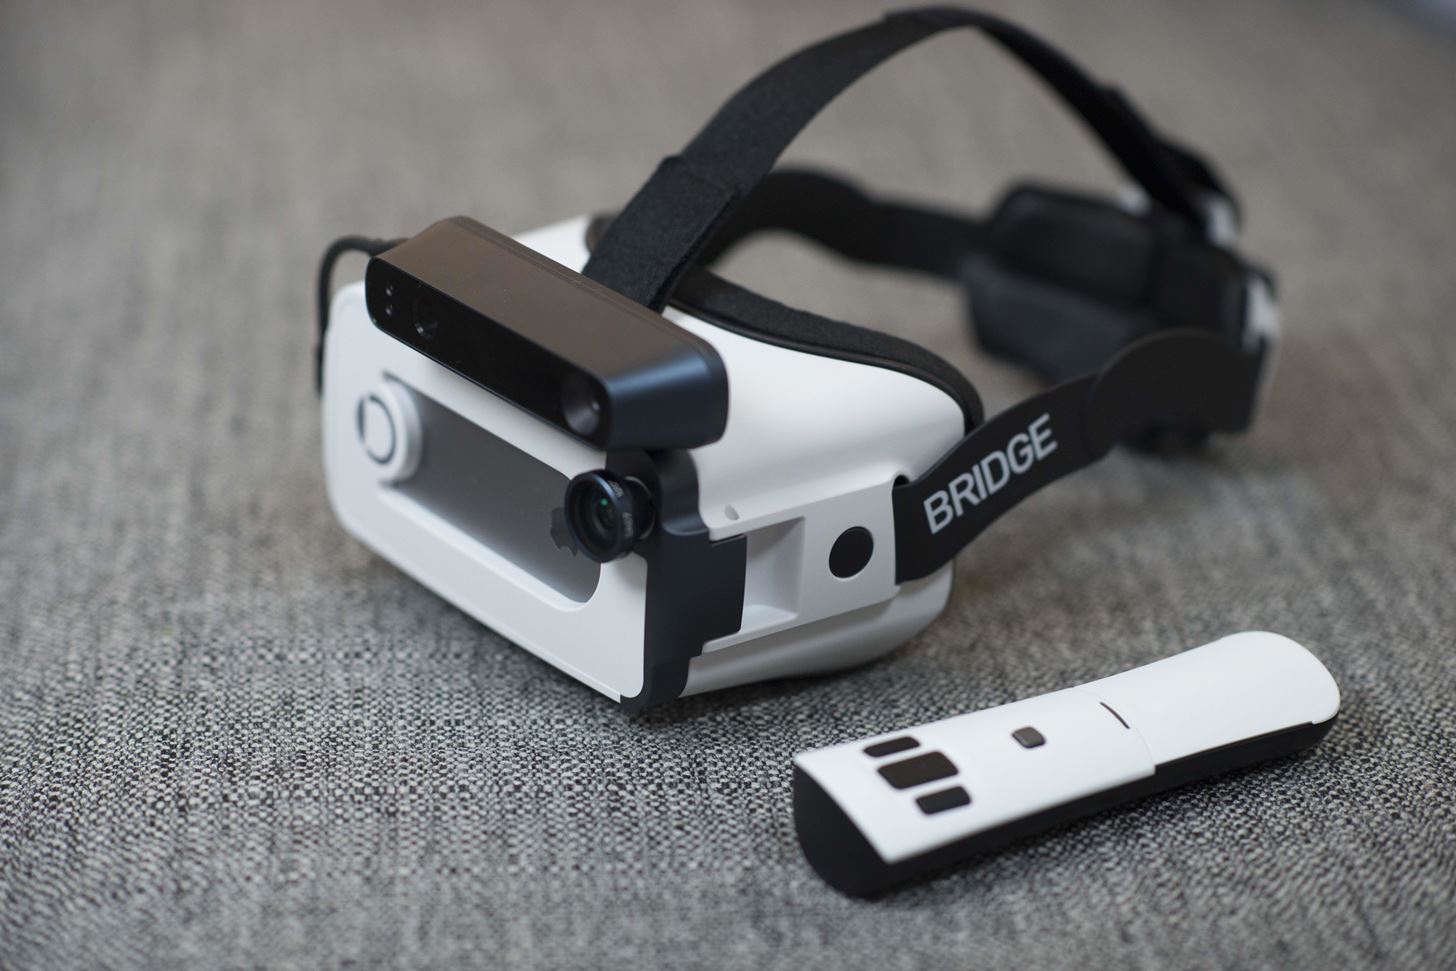 Hands-On: Occipital's Bridge Headset for iPhones Has Magical Spatial Mapping Abilities